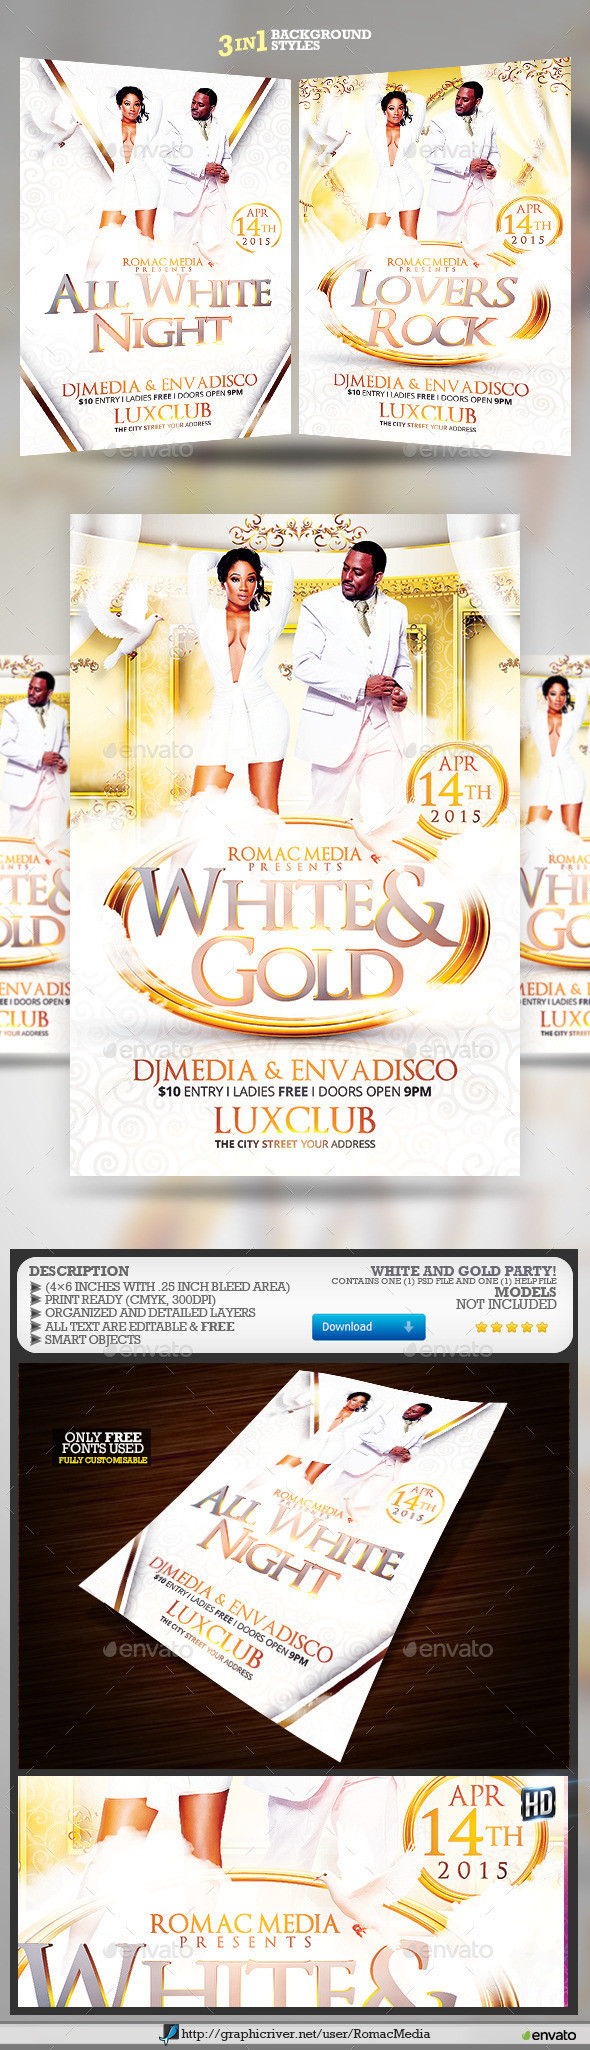 White 20and 20gold 20party 20flyer 20preview 20image